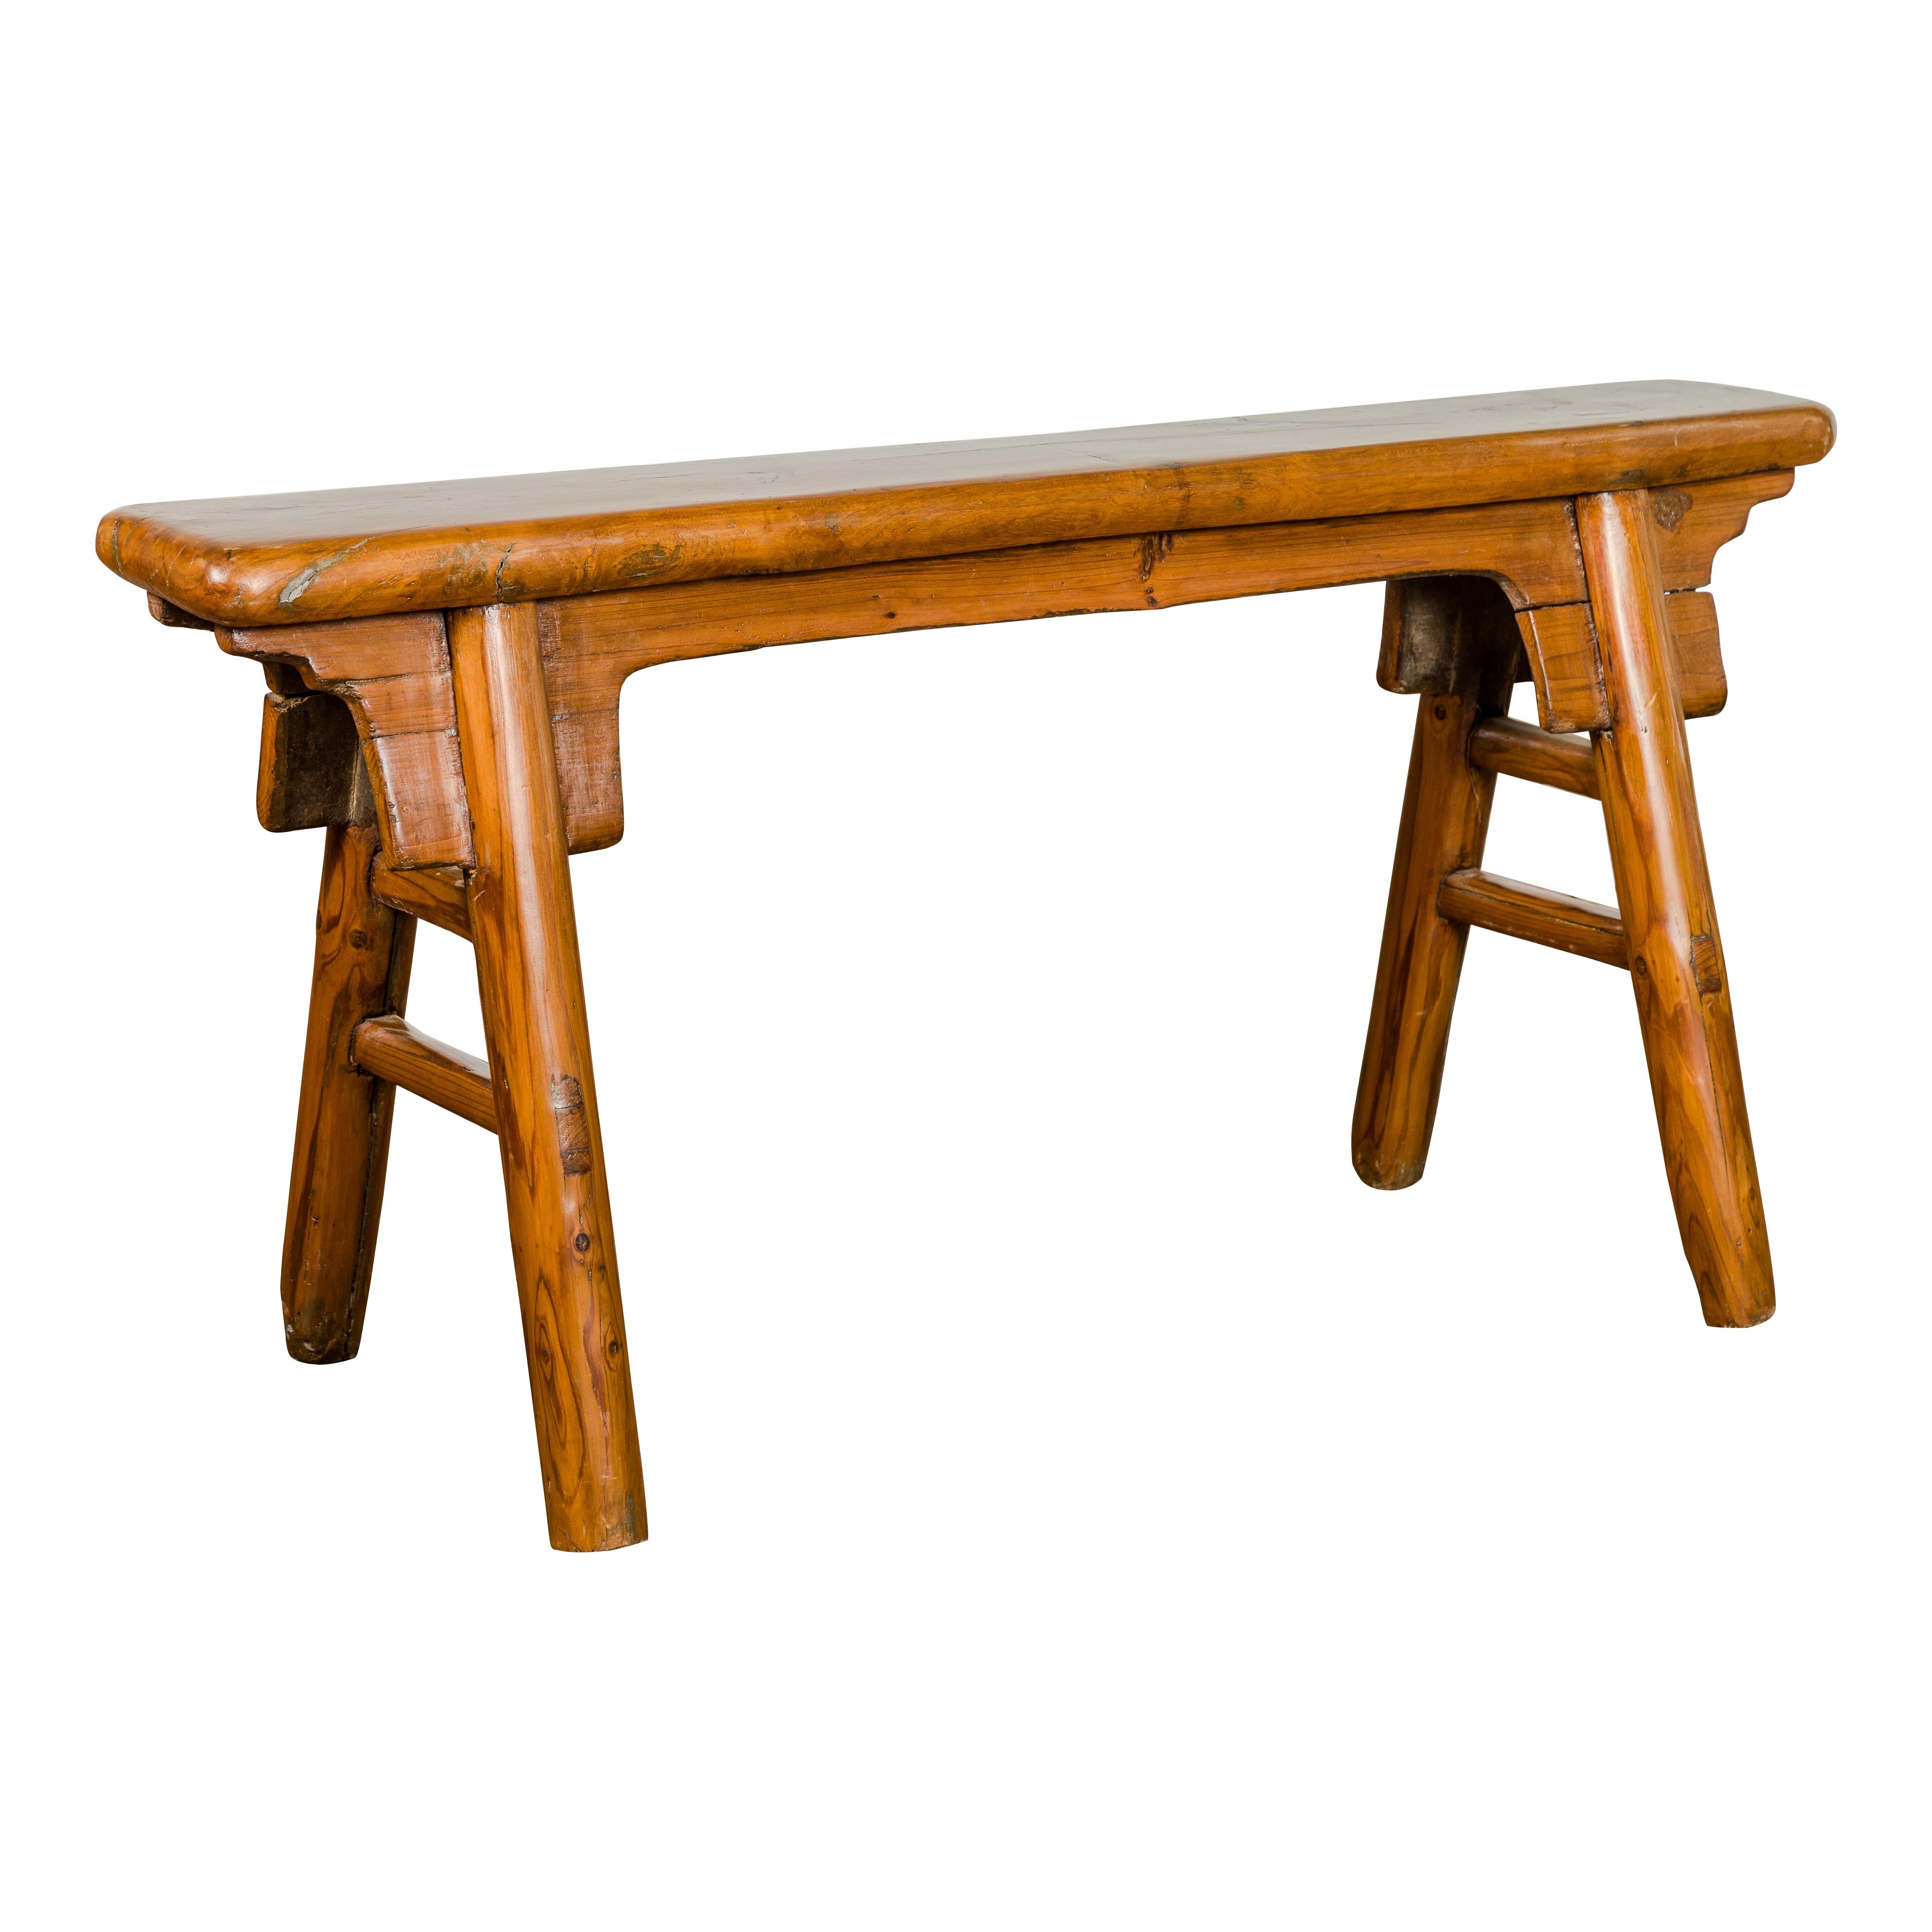 Small Vintage A-Frame Wooden Bench with Rustic Appearance and Splaying Legs For Sale 9